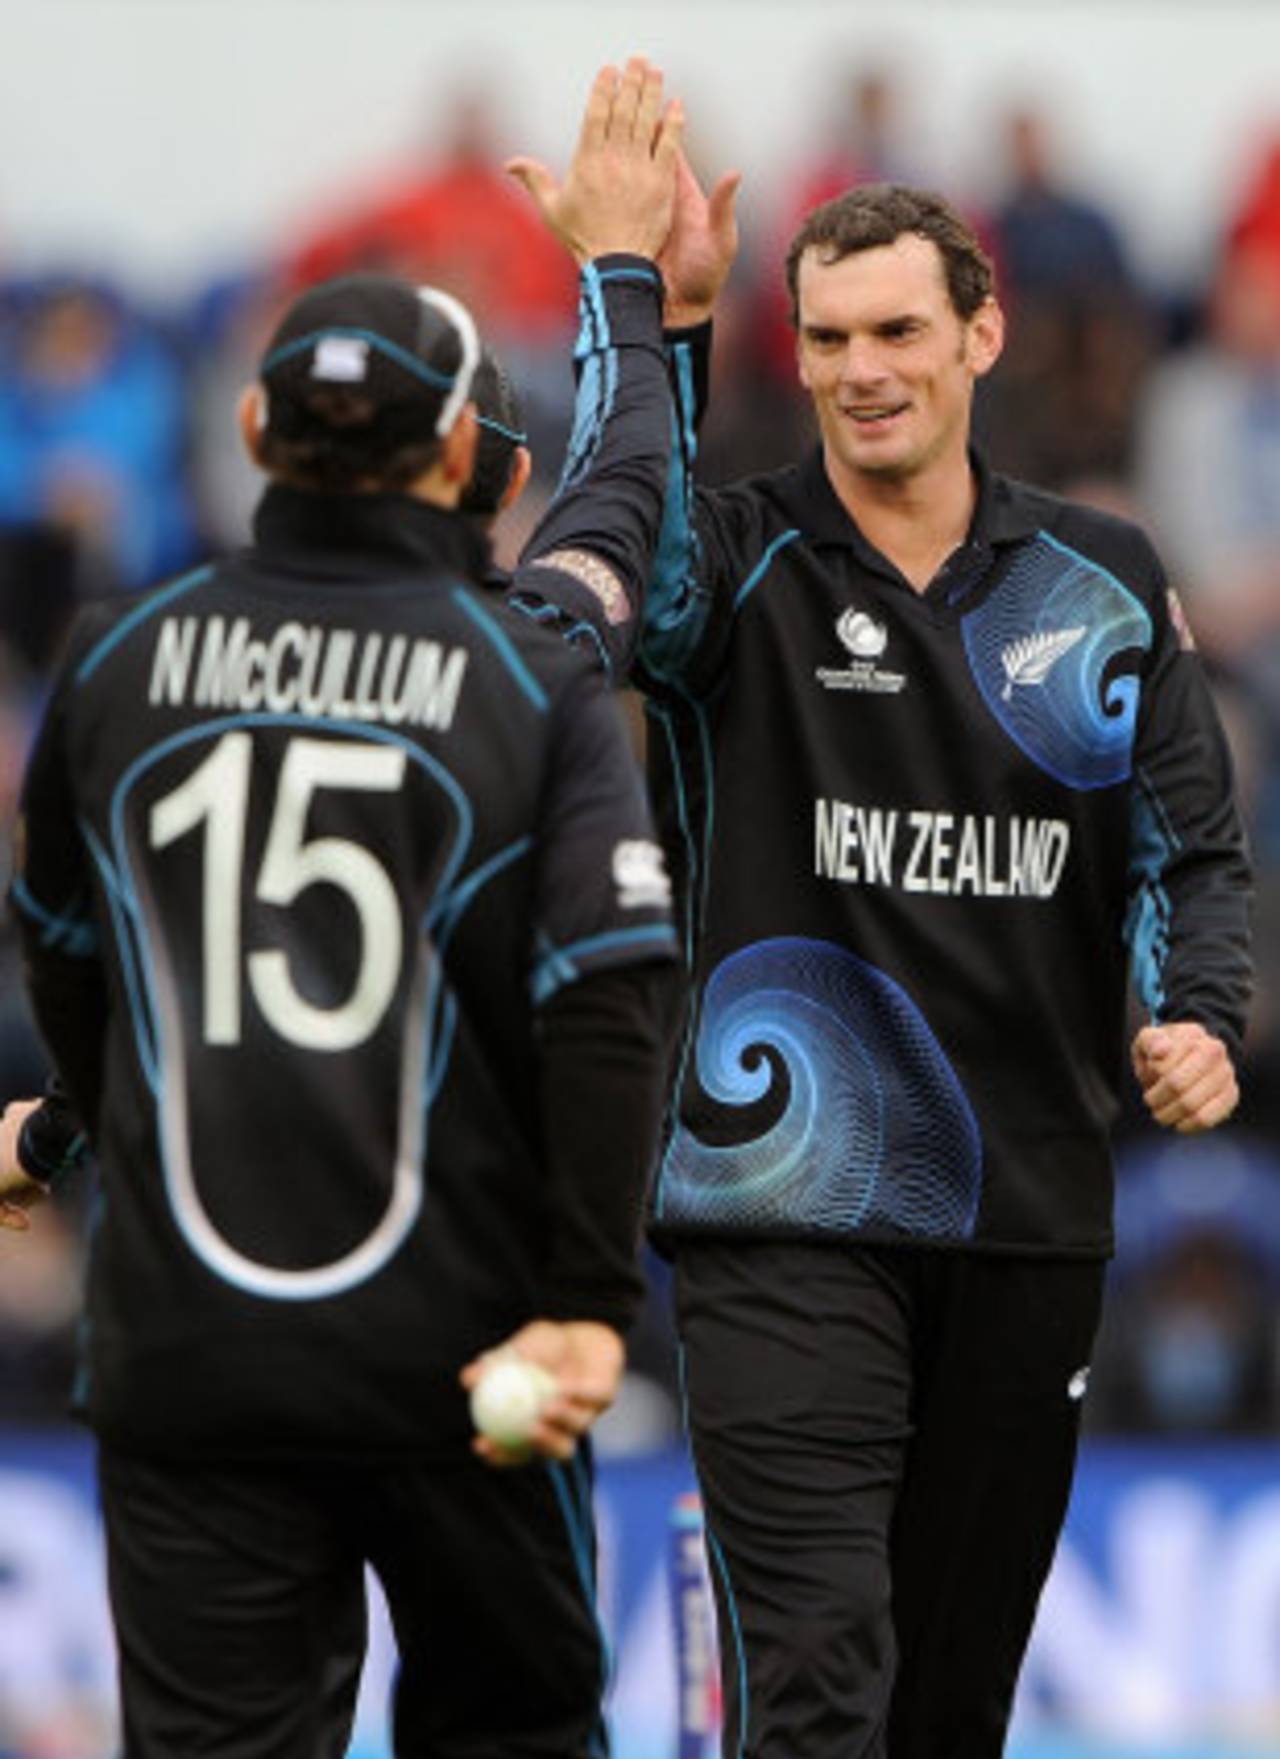 Kyle Mills celebrates a wicket, England v New Zealand, Champions Trophy, Group A, Cardiff, June 16, 2013